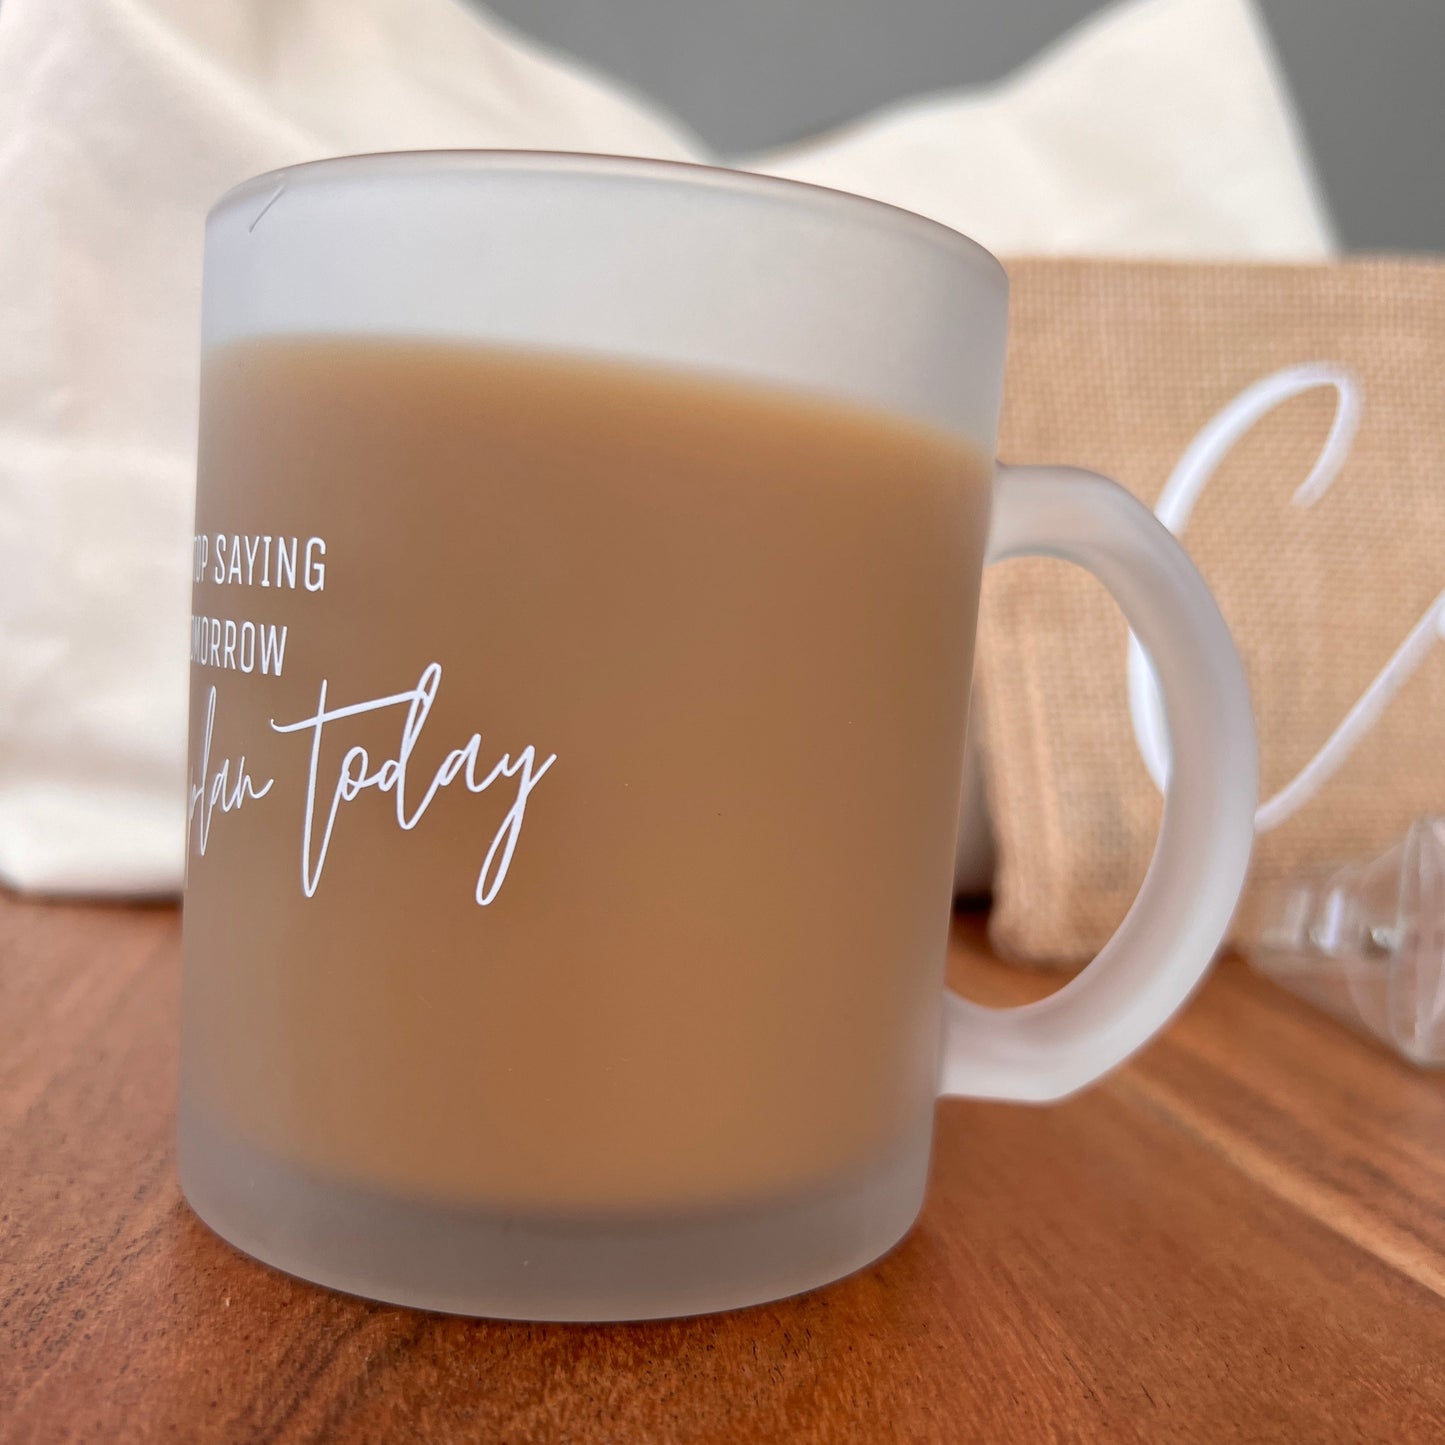 Frosted Glass Mug • Stop saying tomorrow, plan today • OOPSIE